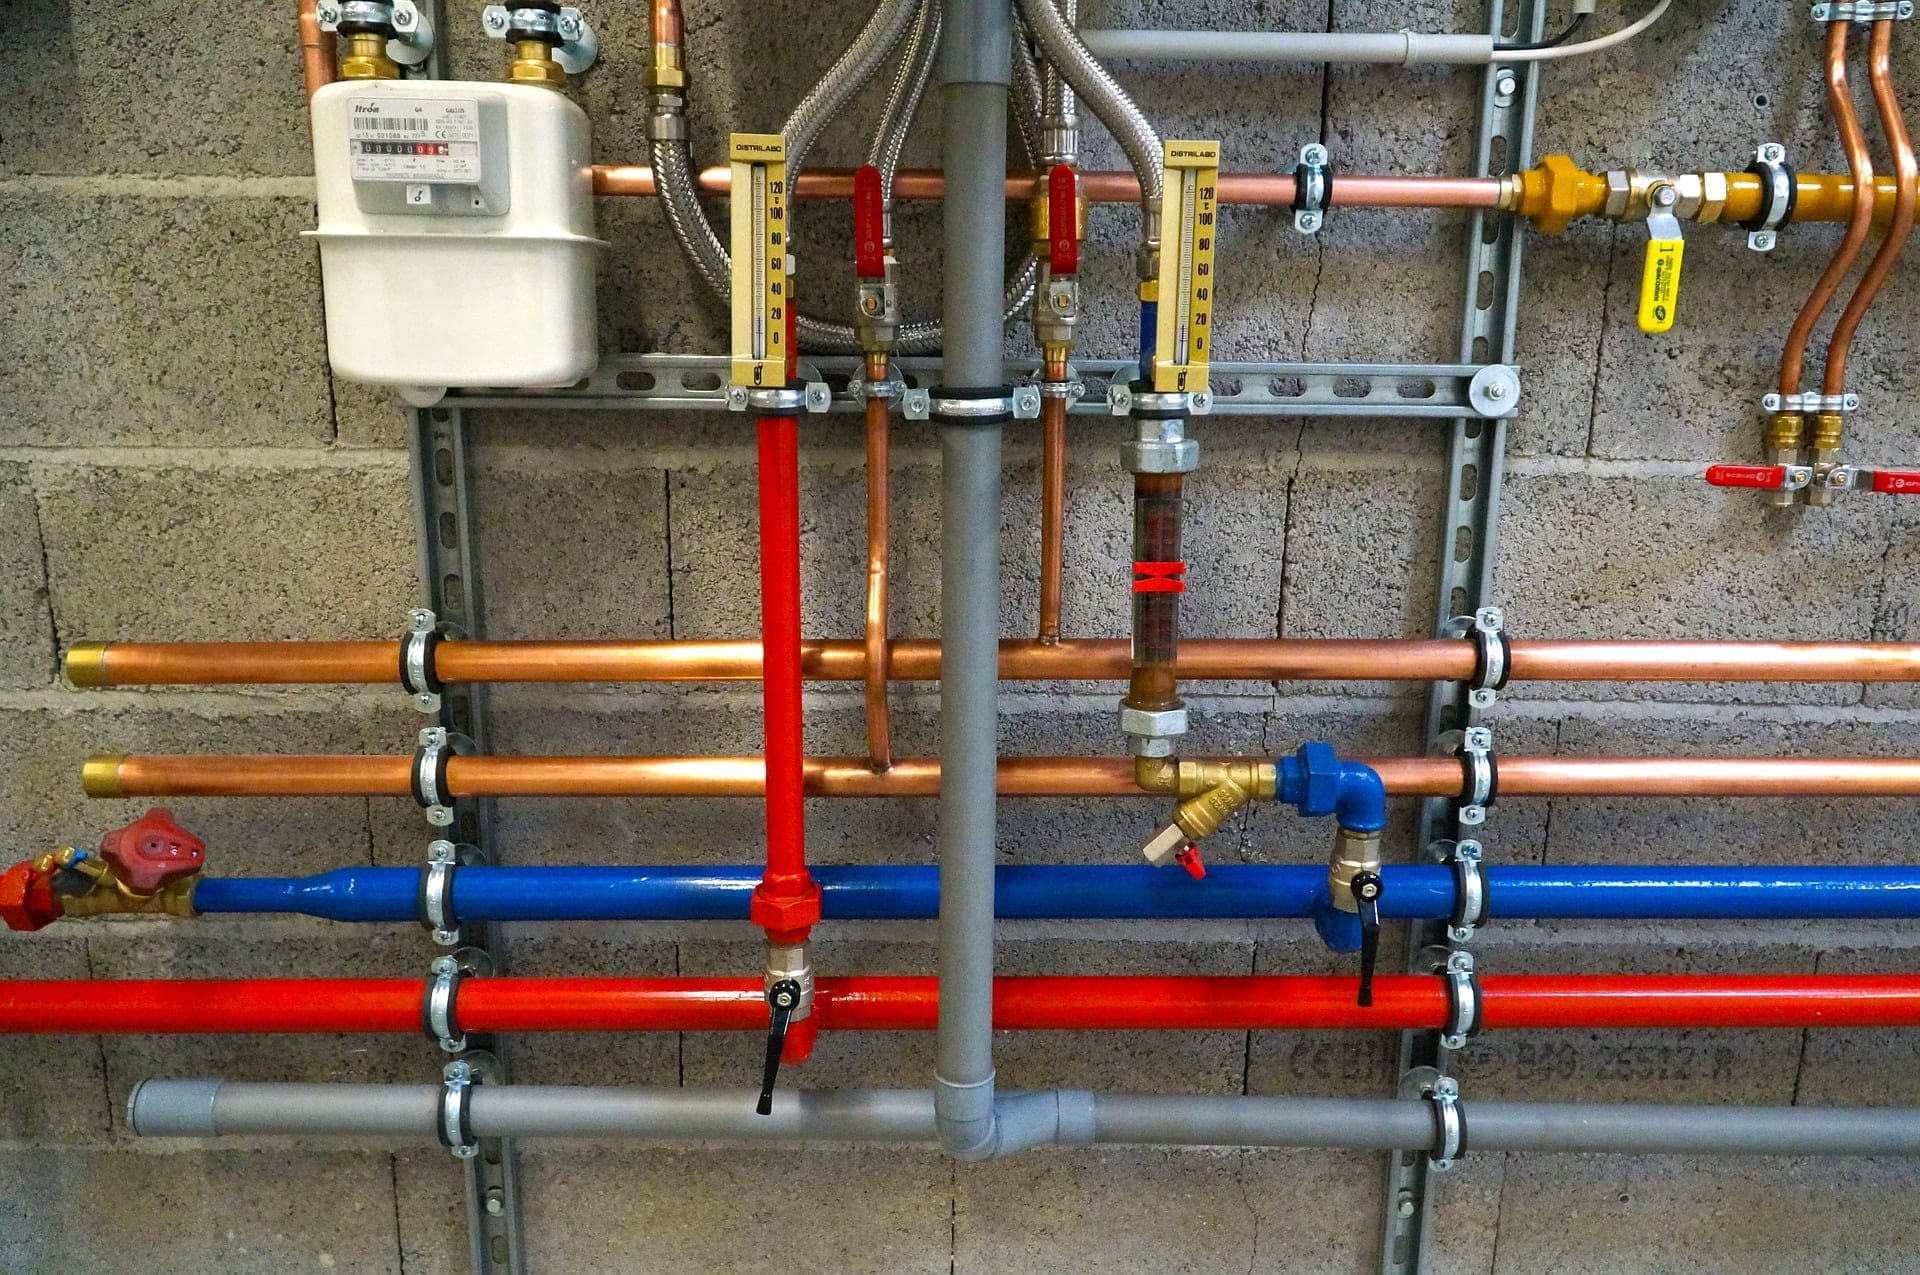 multi coolored plumbing pipes